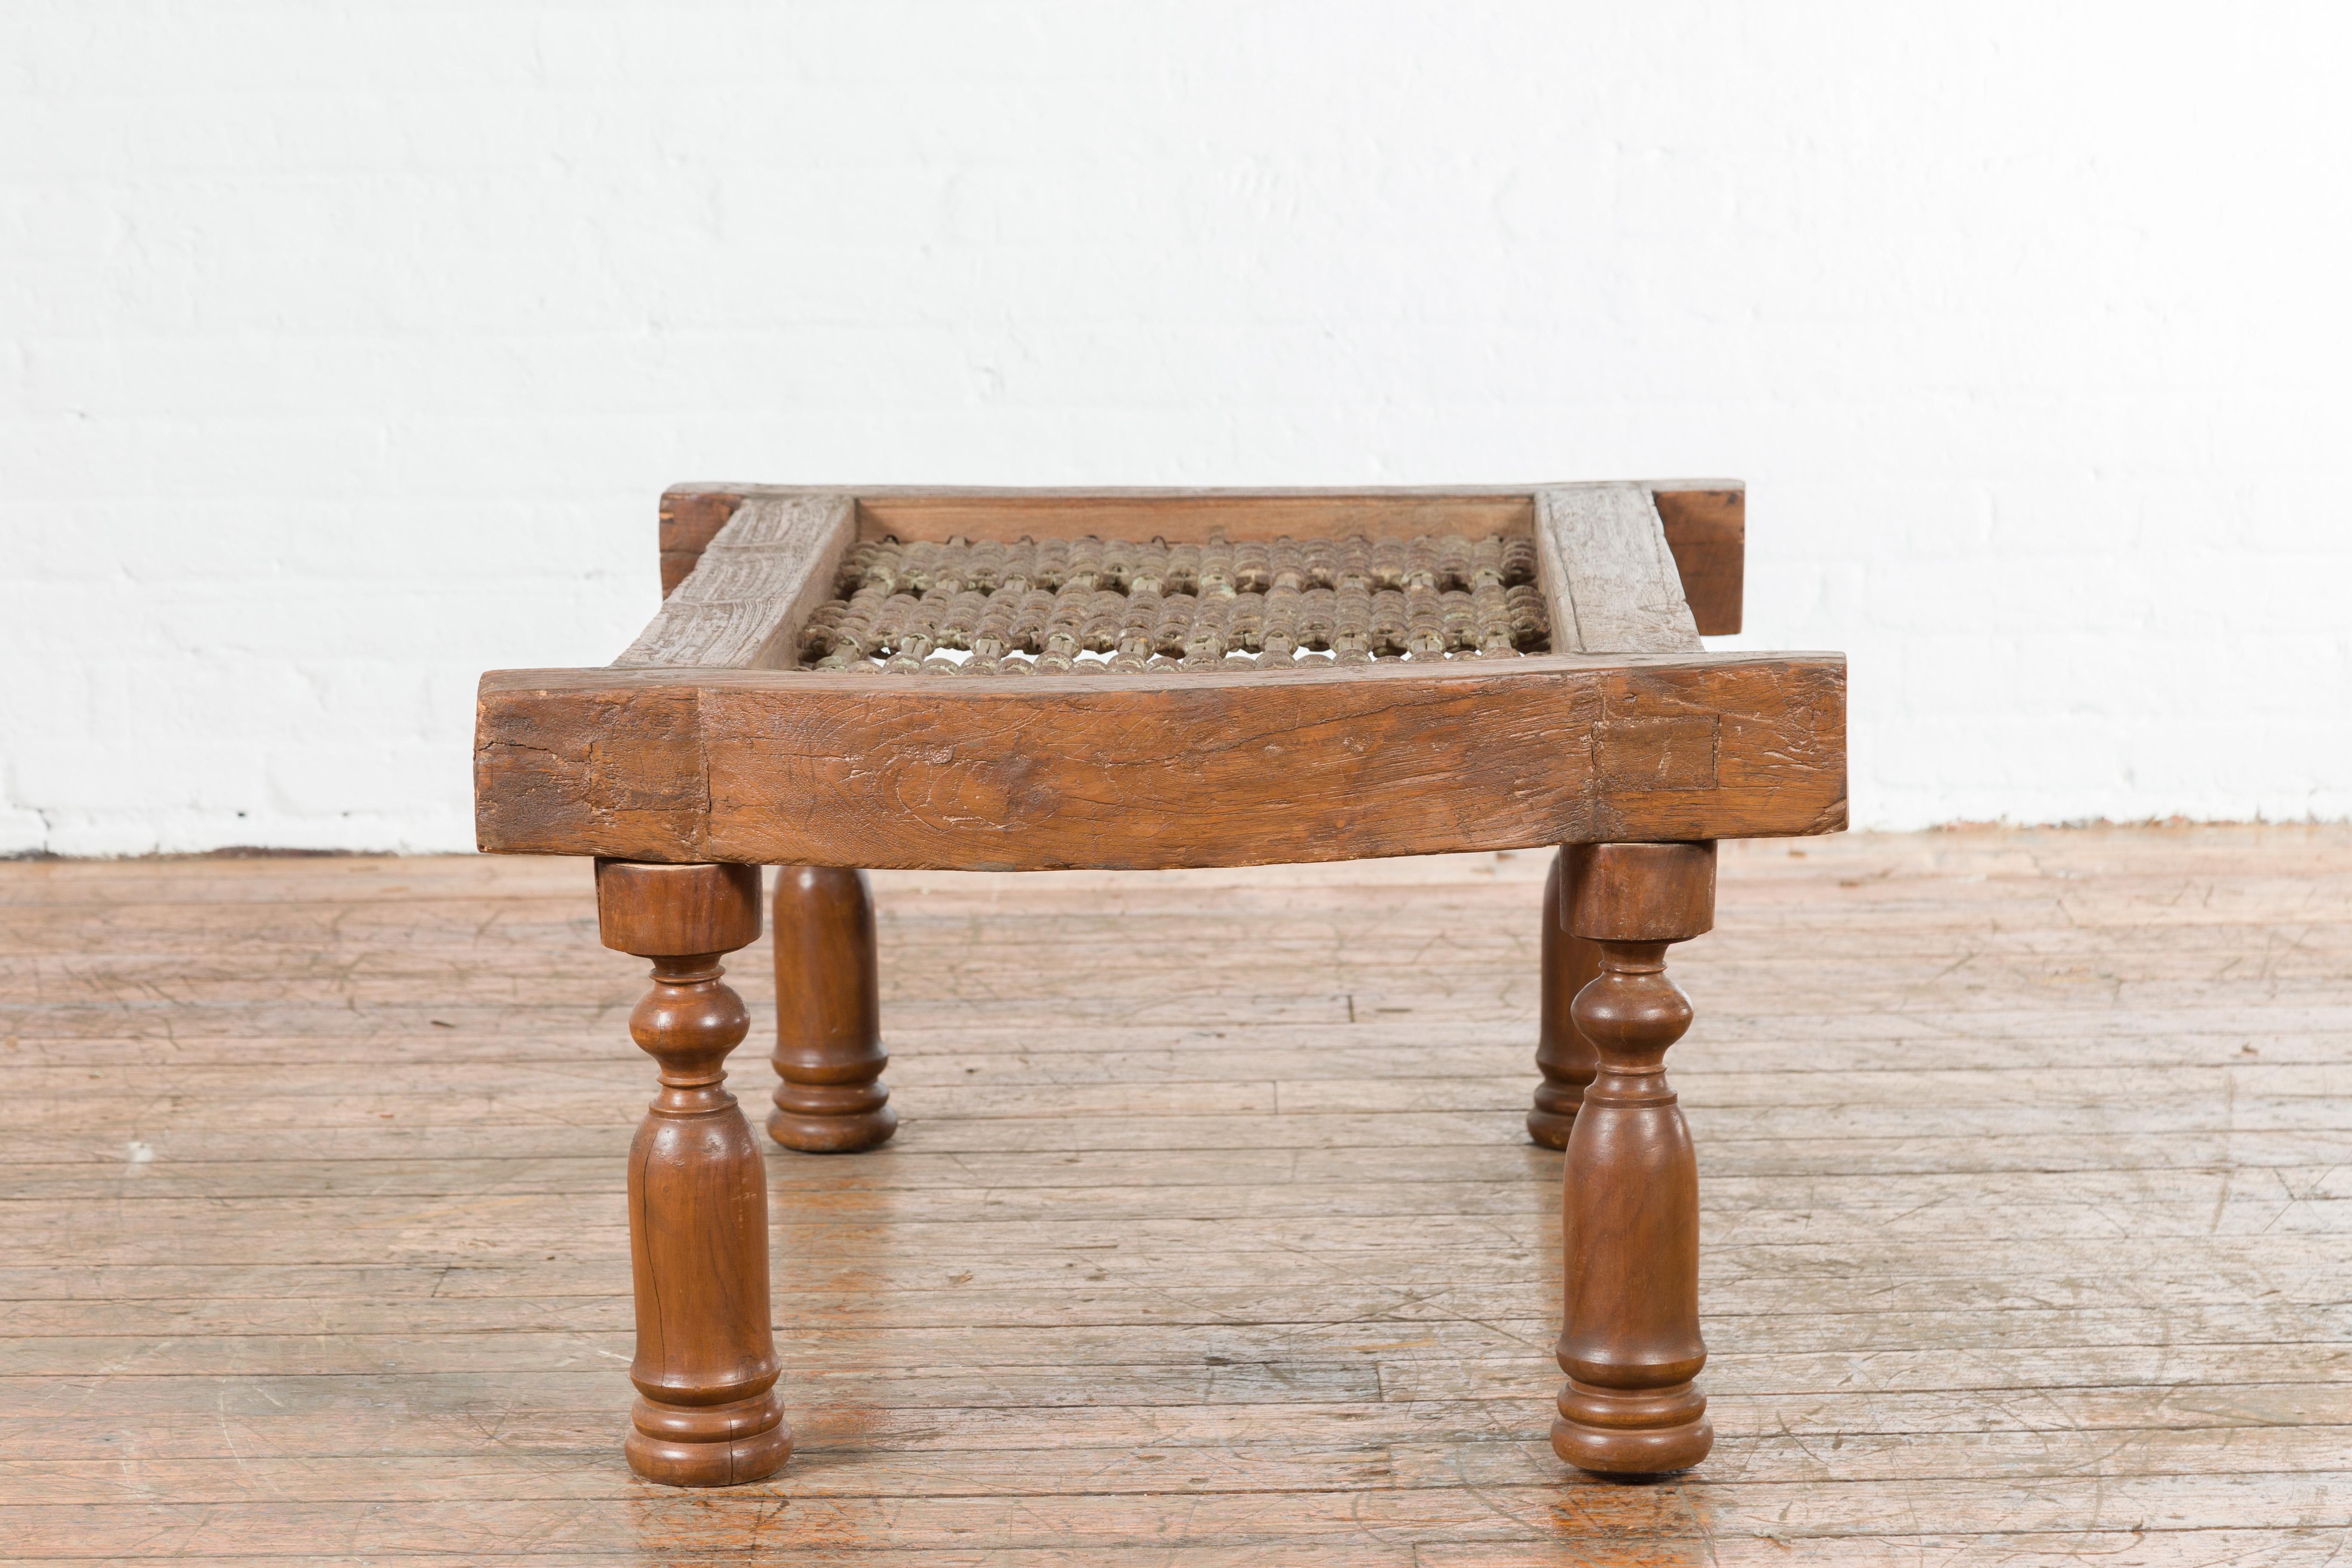 Antique Indian Arched Window Grate Made into a Coffee Table with Baluster Legs For Sale 4